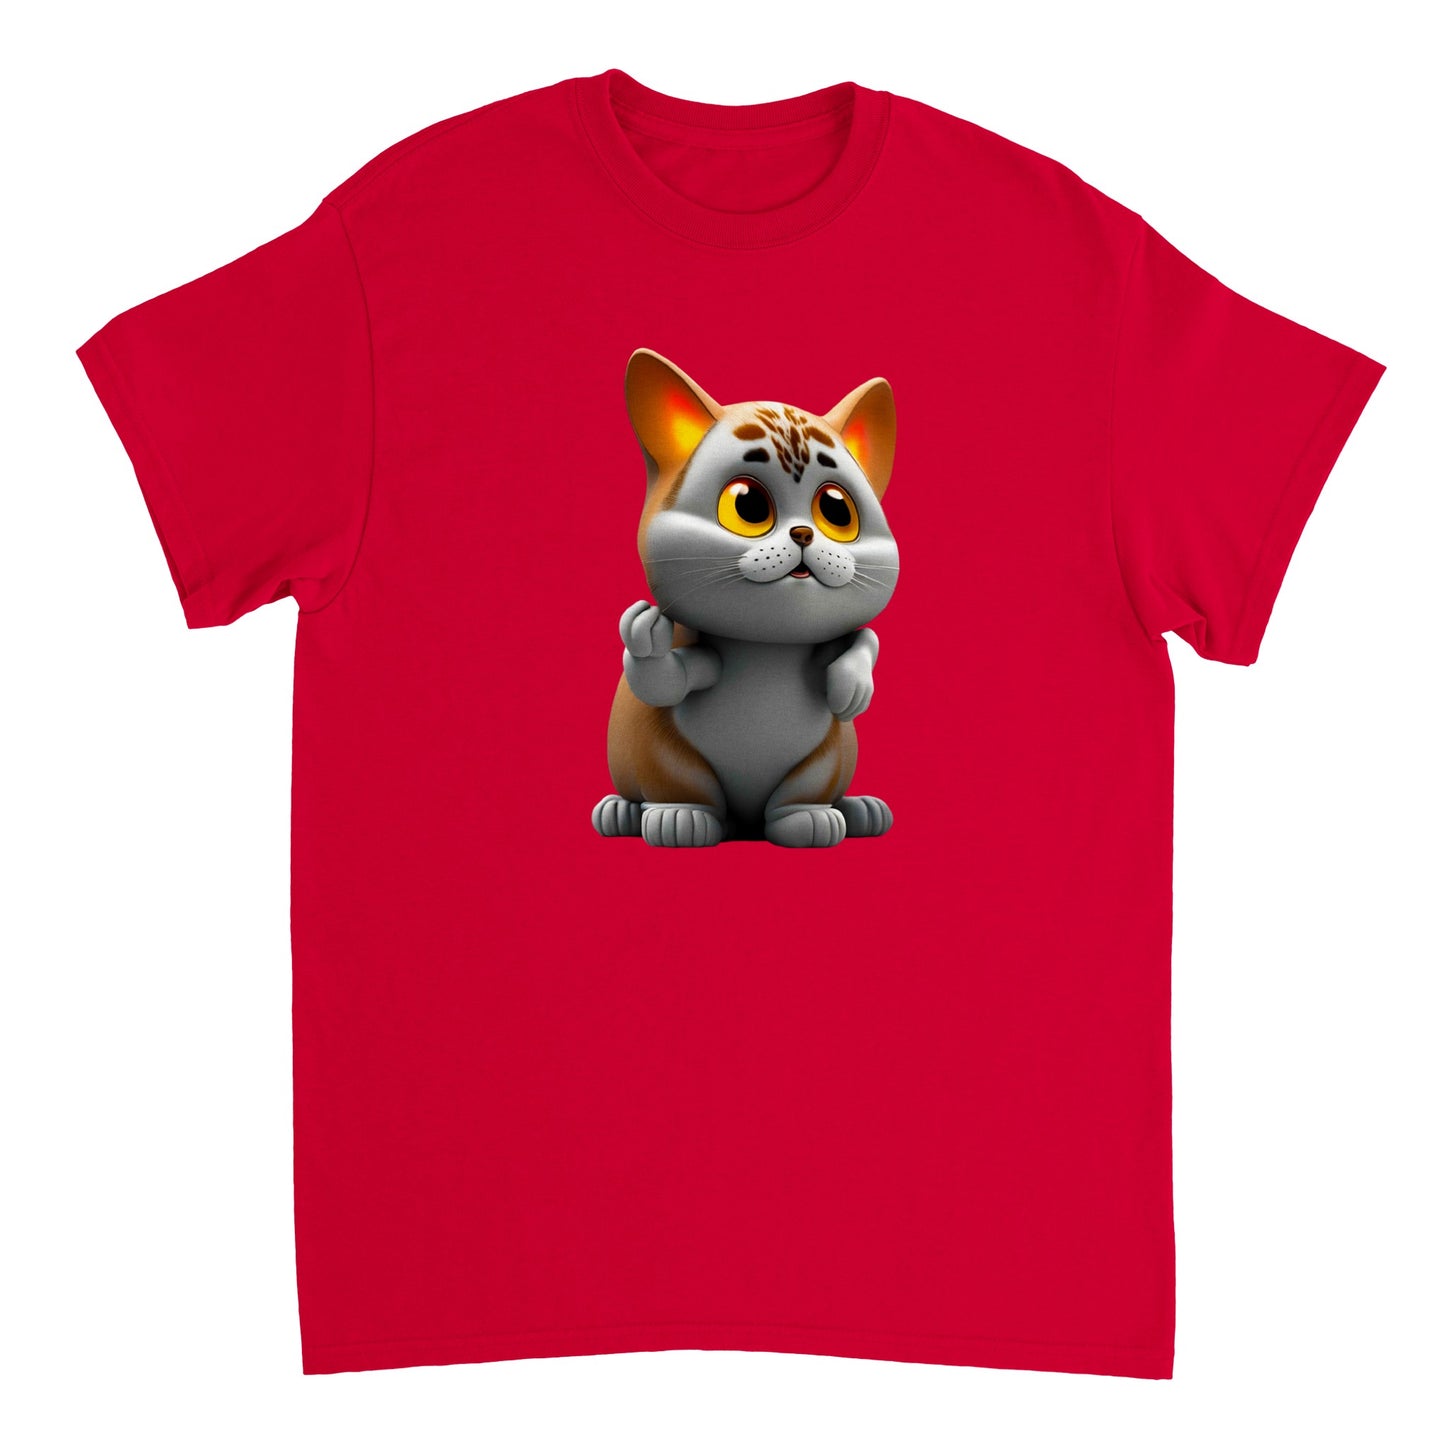 Adorable, Cool, Cute Cats and Kittens Toy - Heavyweight Unisex Crewneck T-shirt 65